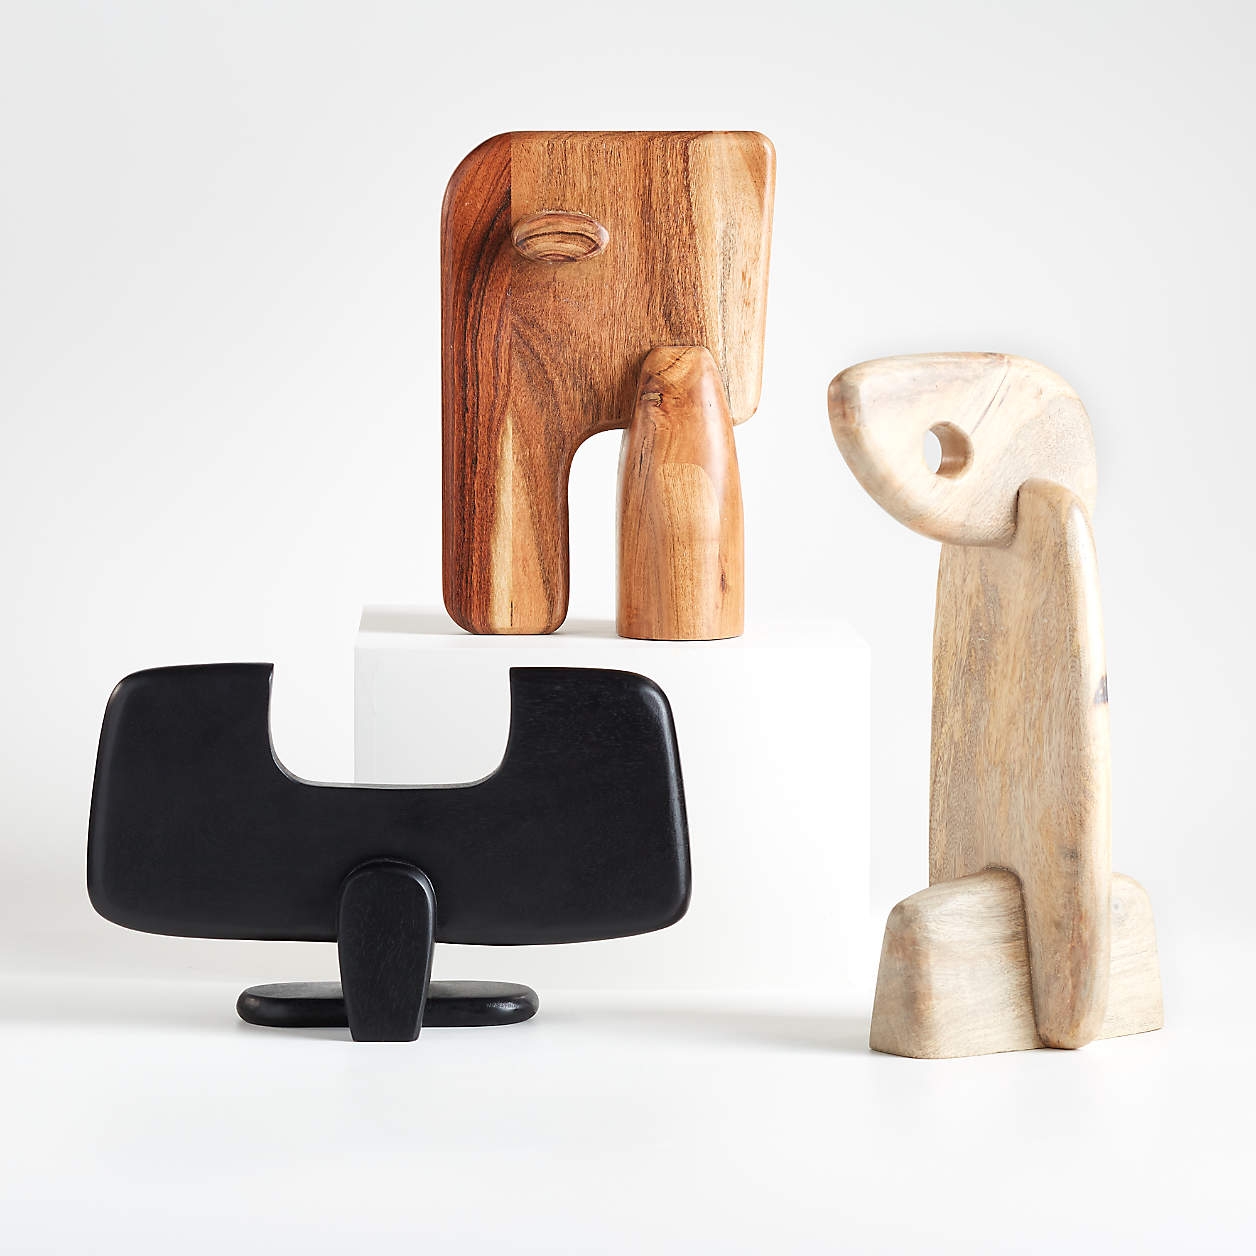 Abstract Wood Bull Sculpture - Image 1